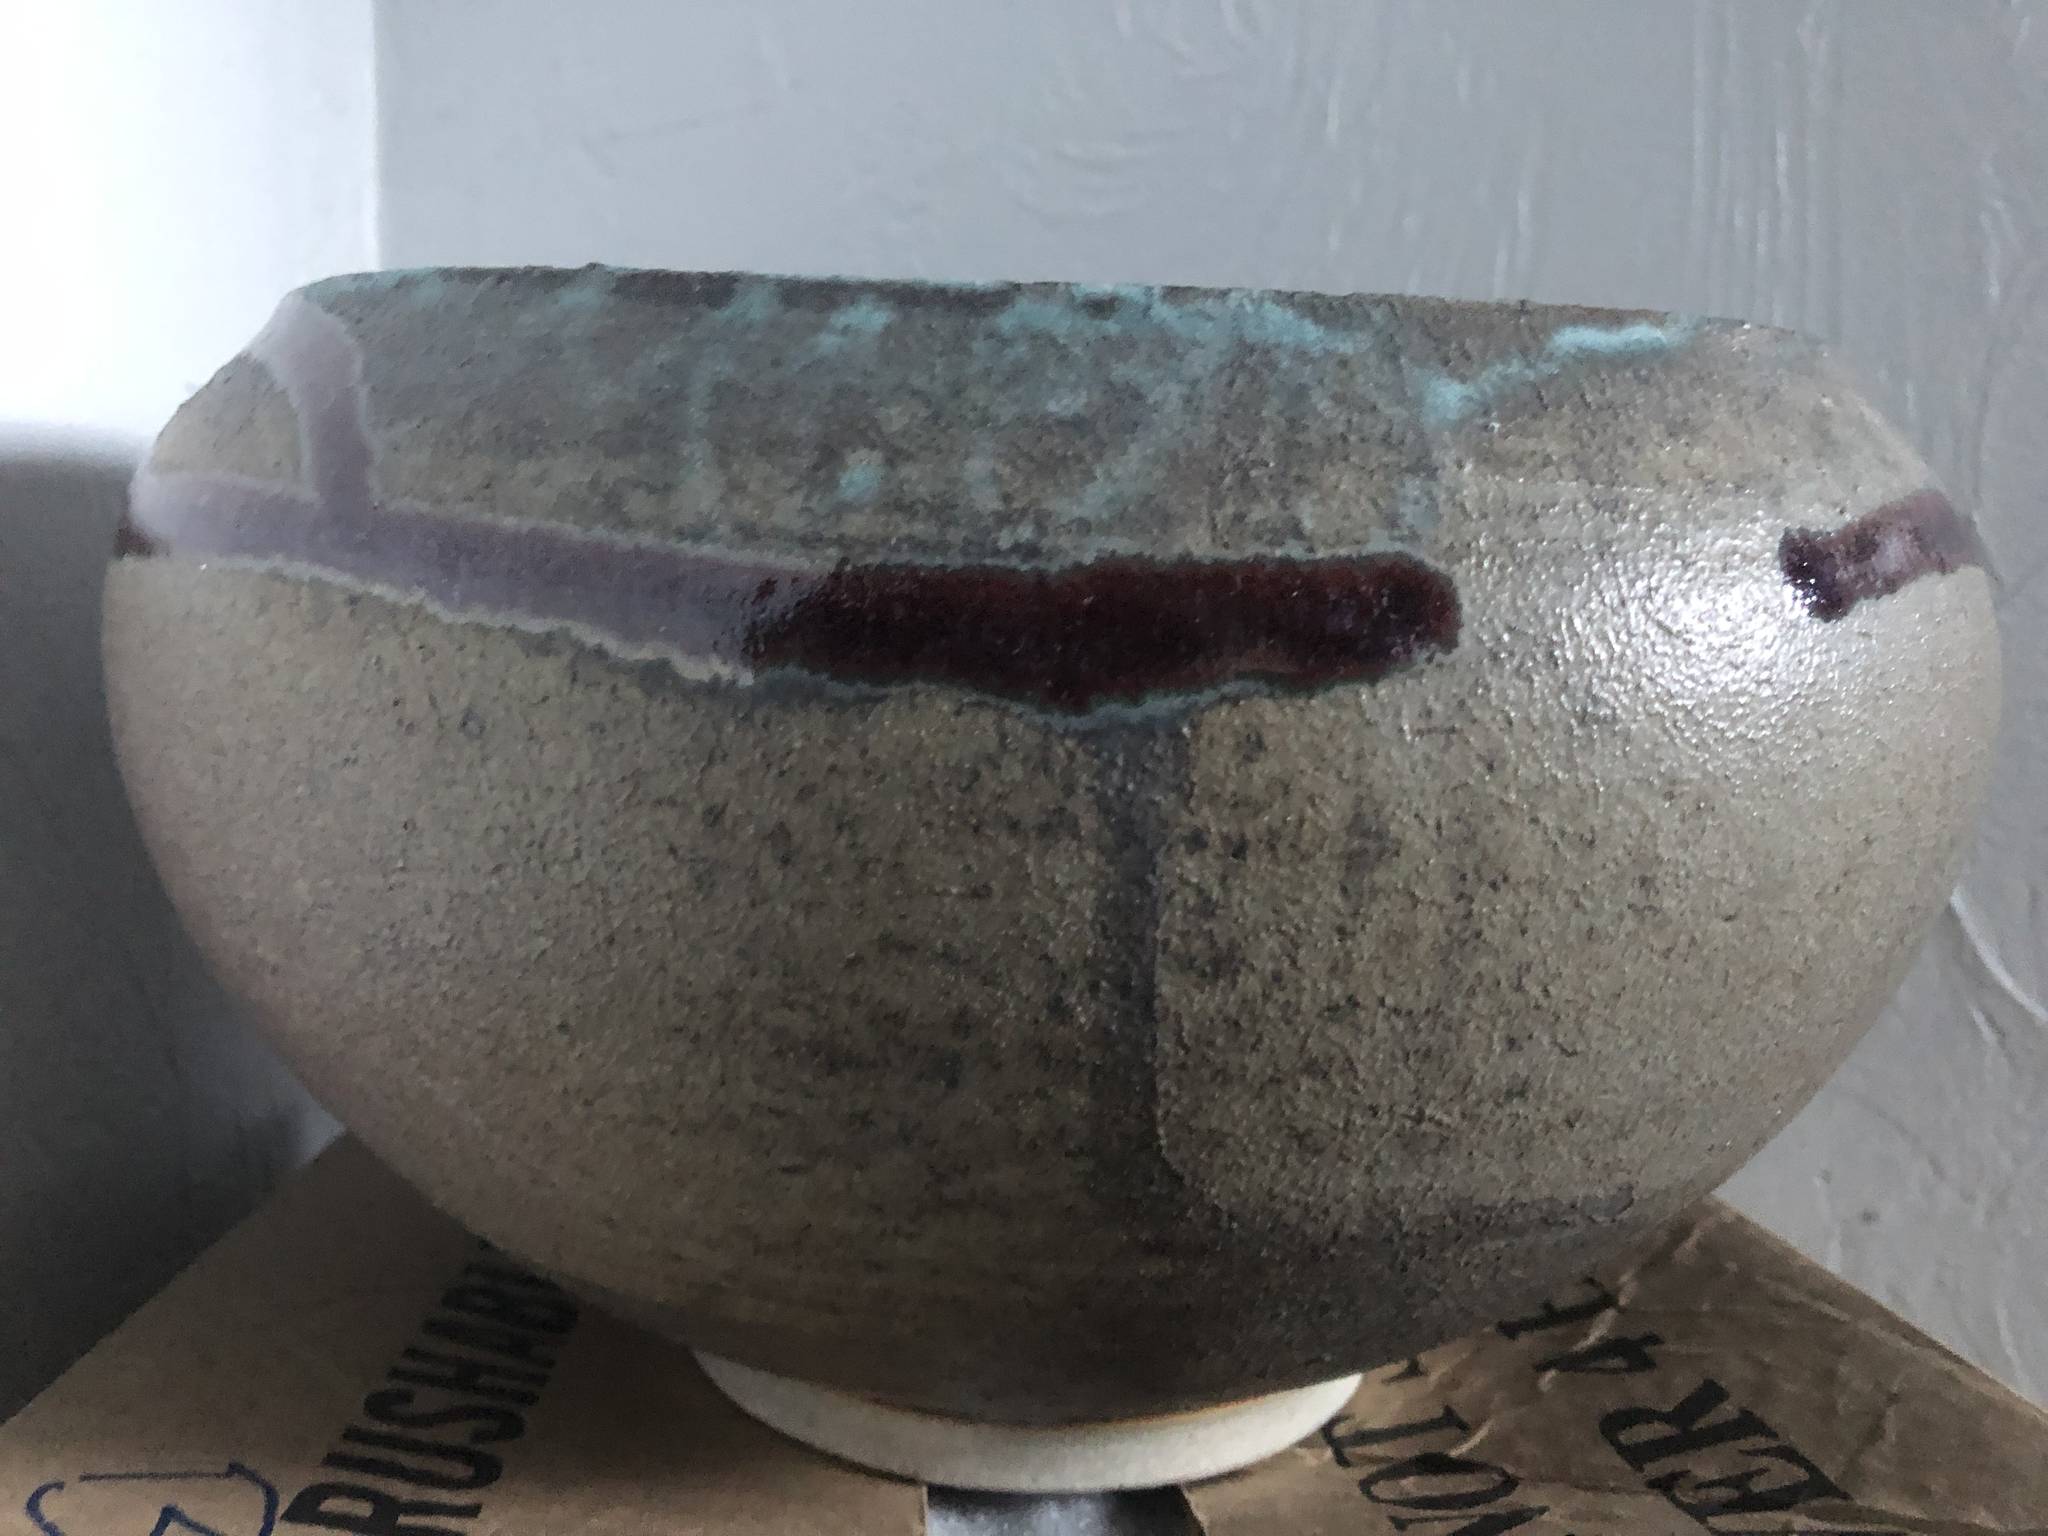 Bowls like those seen here will be available for sale or auction during the Glory Hall’s Empty Bowls fundraiser beginning Friday, April 30, 2021. (Courtesy photo / Mariya Lovishchuk)